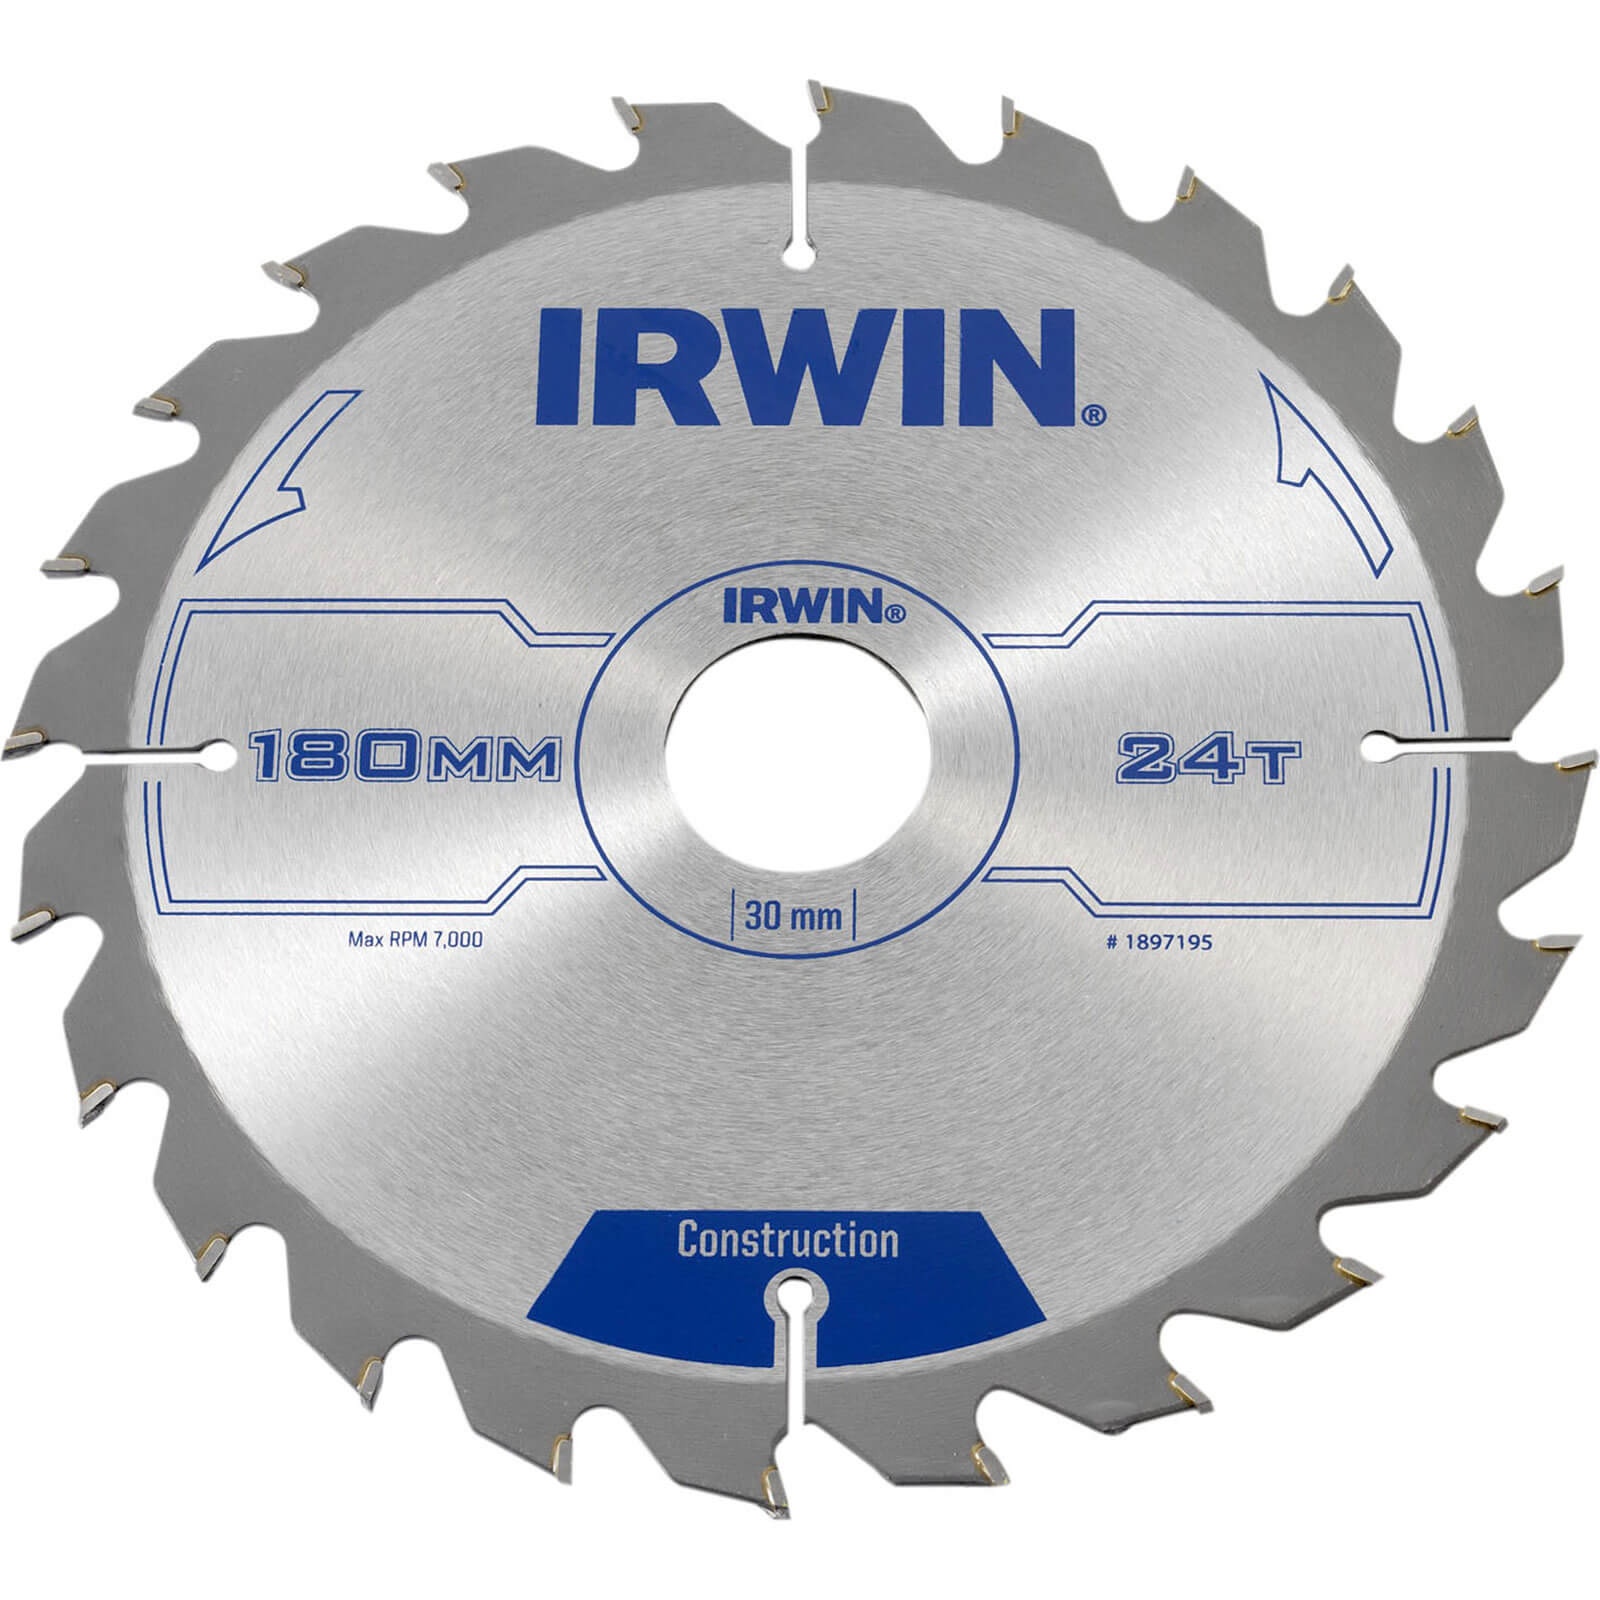 Photo of Irwin Atb Construction Circular Saw Blade 180mm 24t 30mm